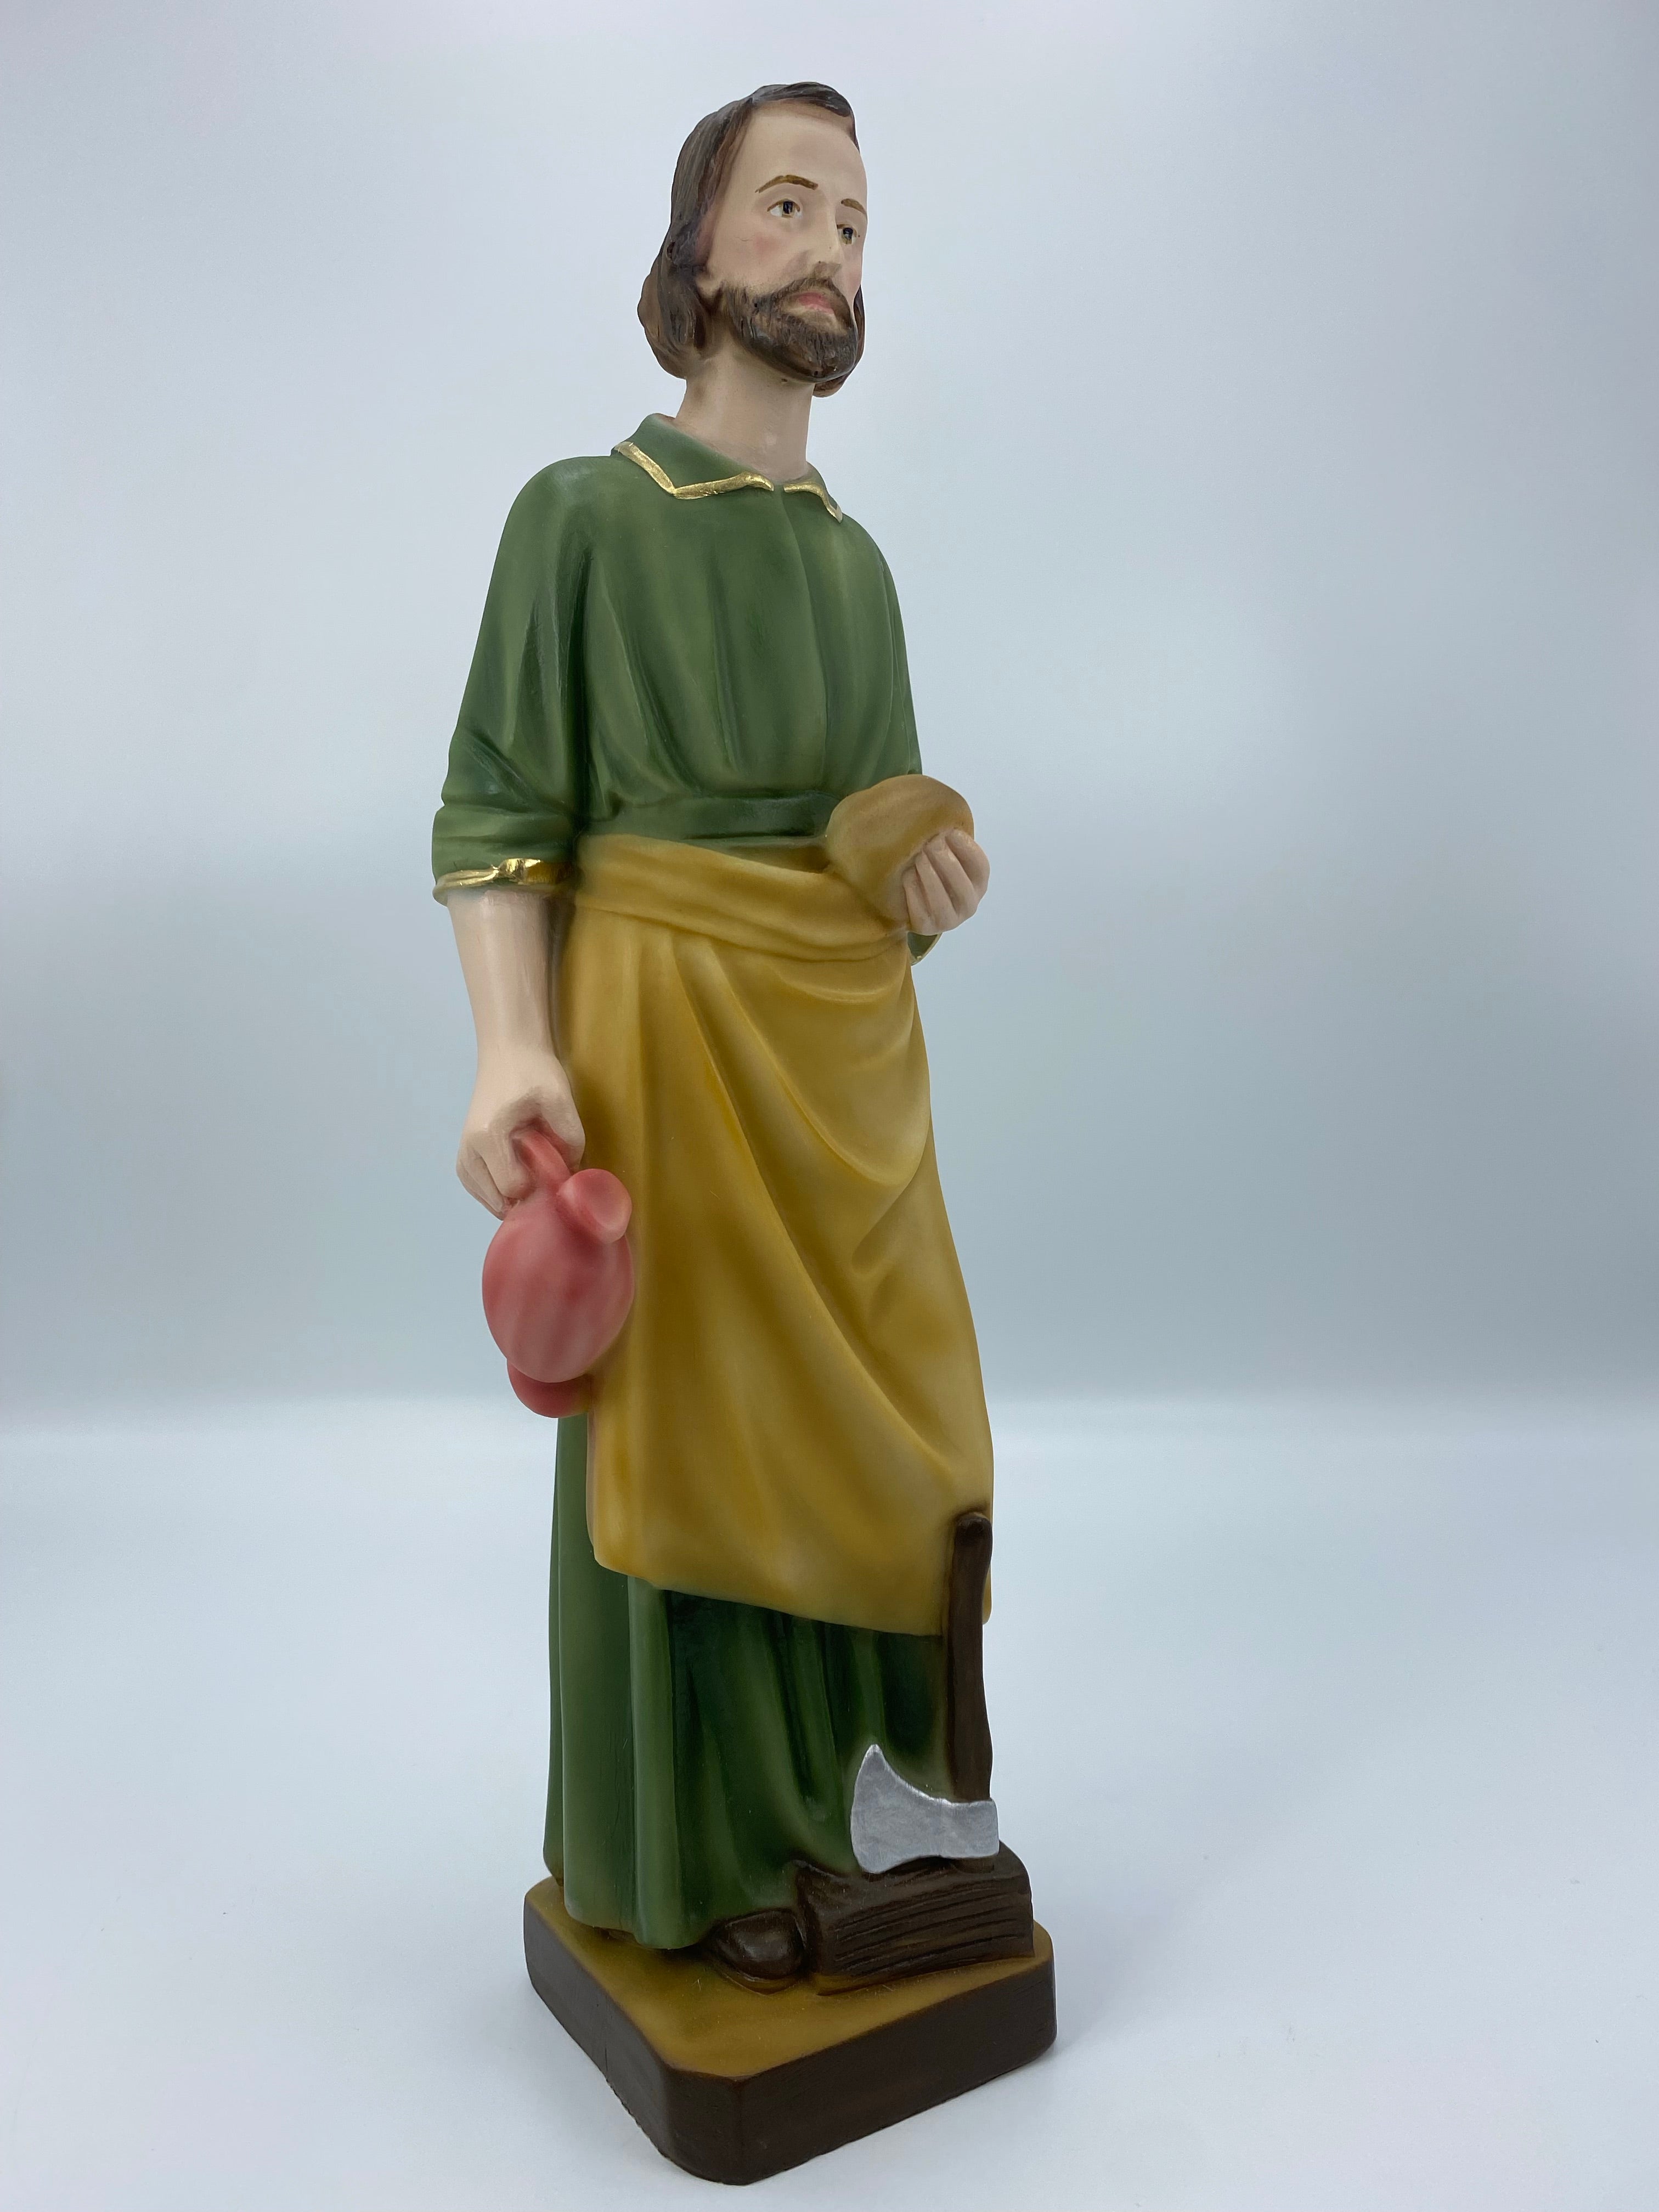 The Faith Gift Shop Saint Joseph The Worker - Hand Painted in Italy - Our Tuscany Collection  / San Jose el Trabajador